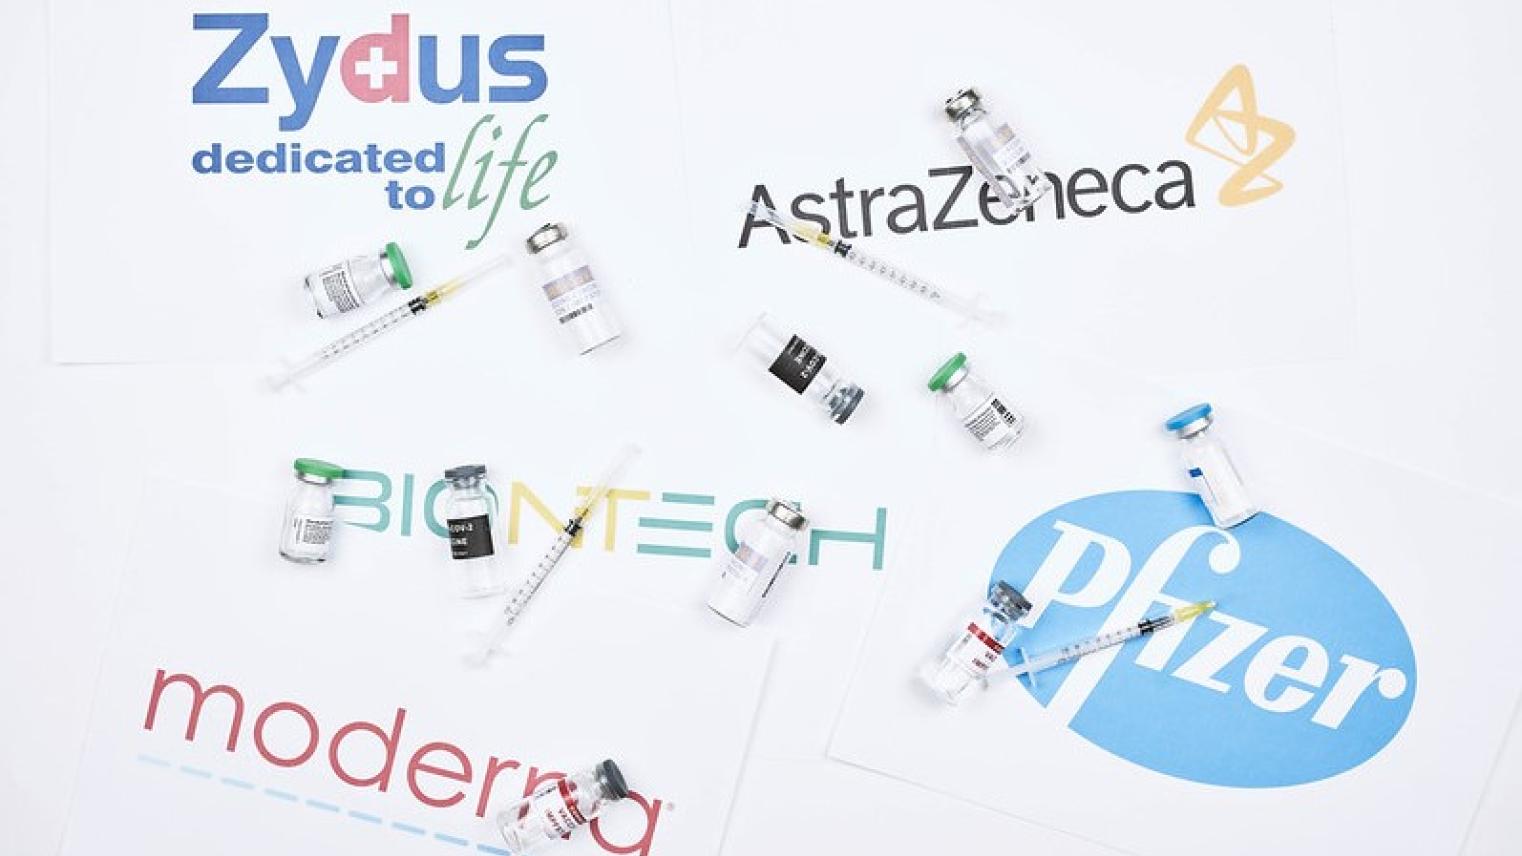 Image credit: Image of vaccine vials, syringes and pharmaceutical company logos by Marco Verch Professional Photographer on Flickr